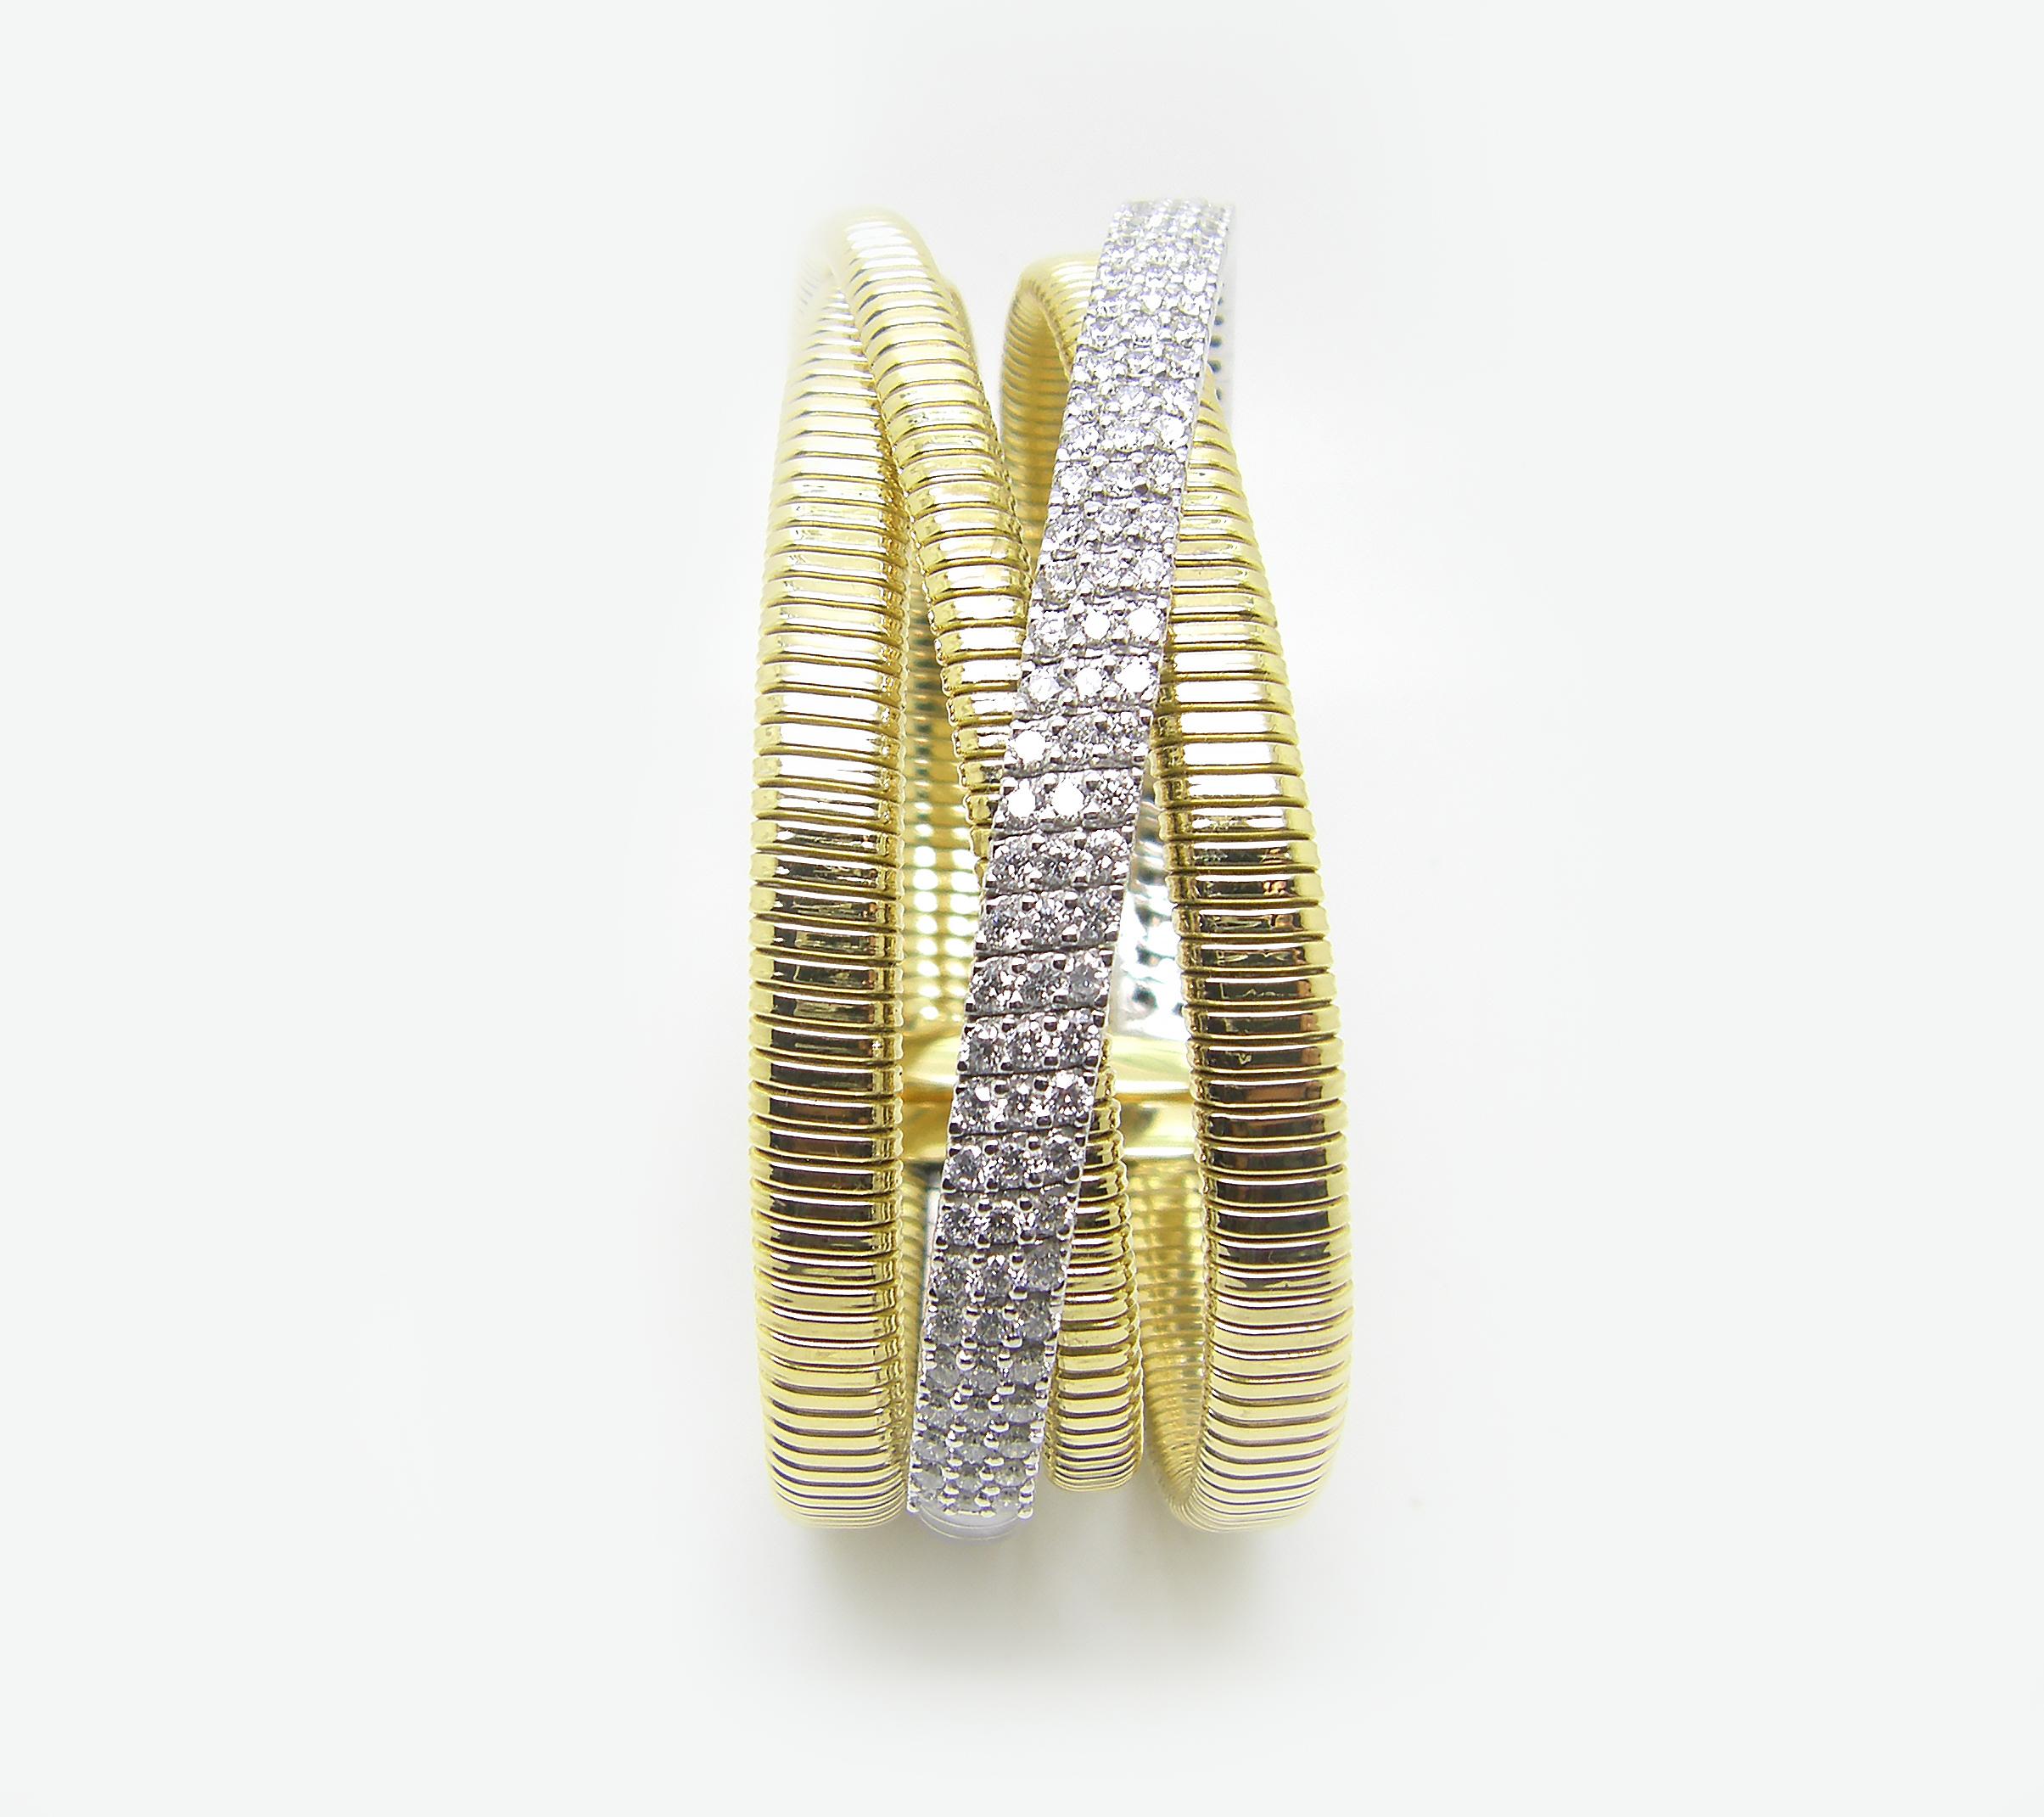 S.Georgios designer two-tone cuff bracelet is solid white and yellow gold 18 karats and all custom made. The gorgeous Bracelet is hand-made from four bracelets attached together and flexible making it stretch and very comfortable. One of the four